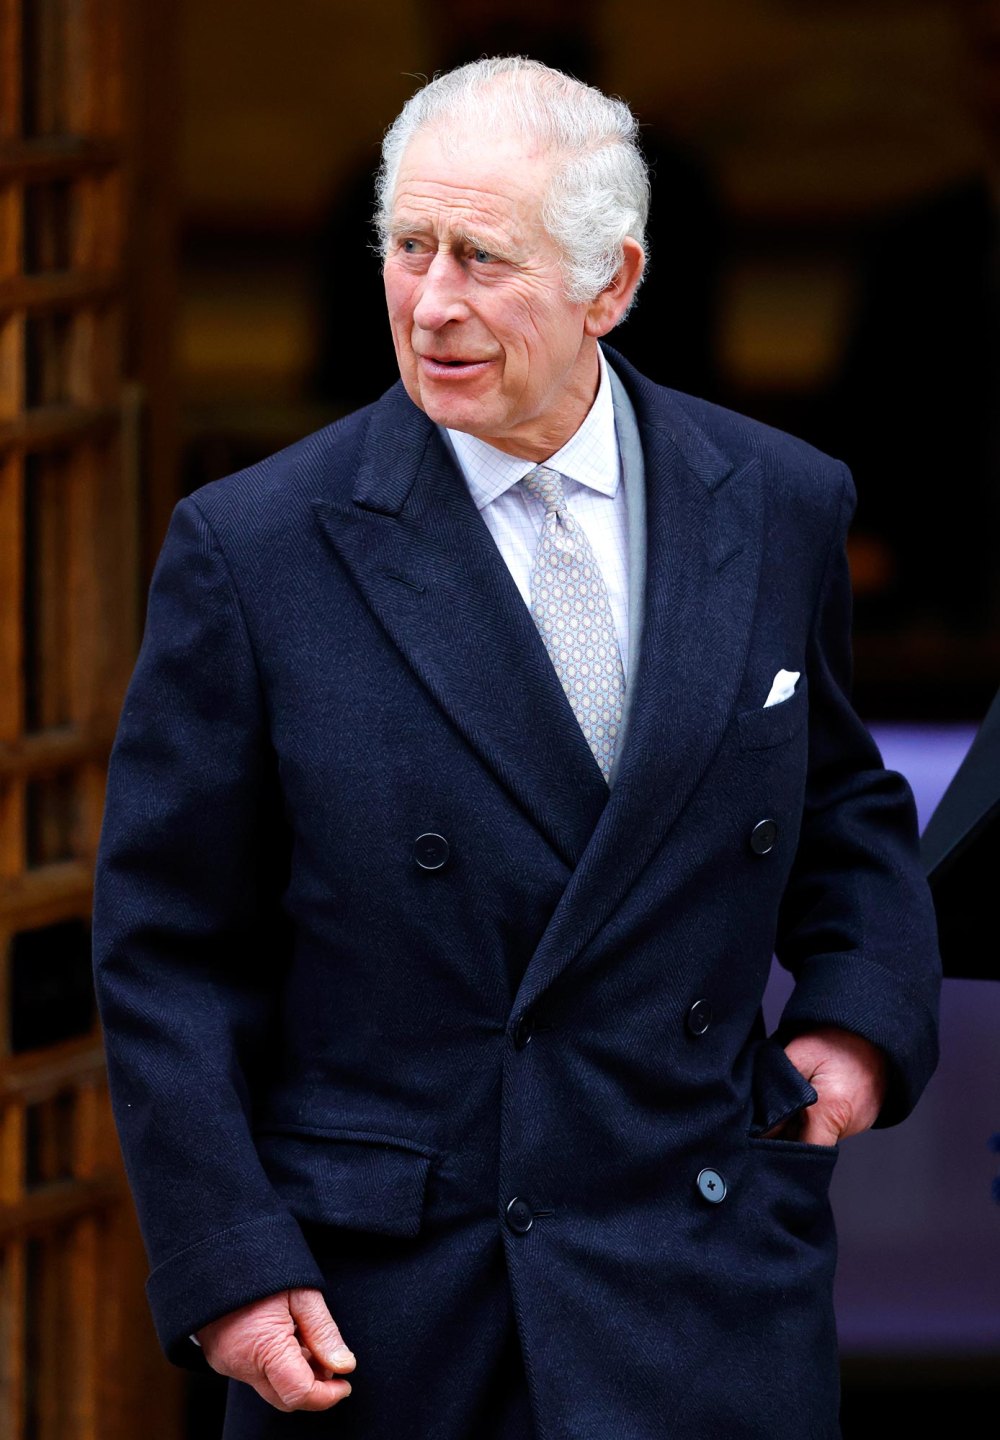 King Charles III s Cancer is Not in His Prostate Says Royal Reporter 731